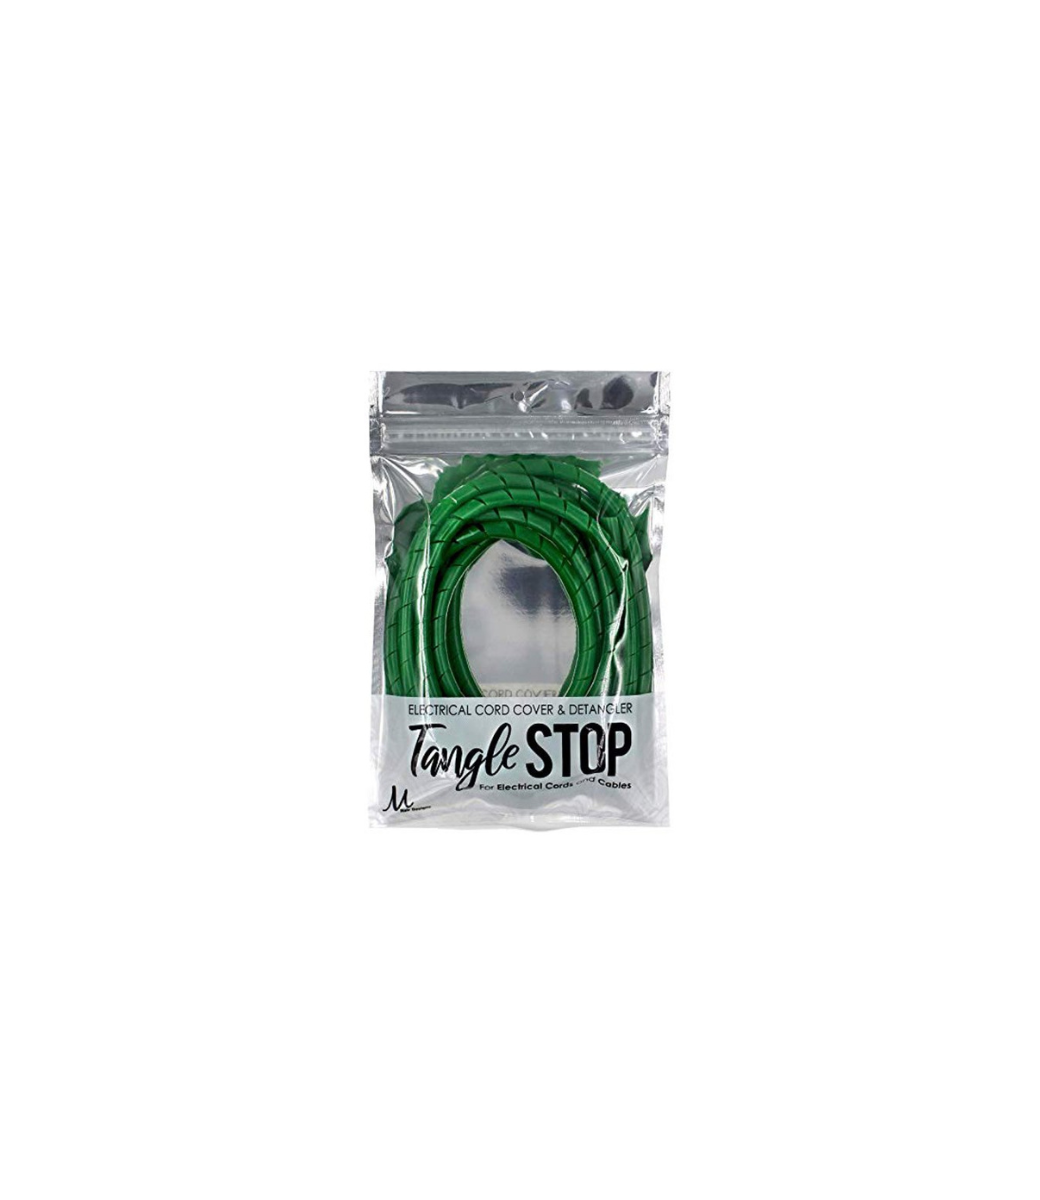 M HAIR DESIGNS M HAIR DESIGNS - Electrical Cord Cover & Detangle - Tangle Stop - Green